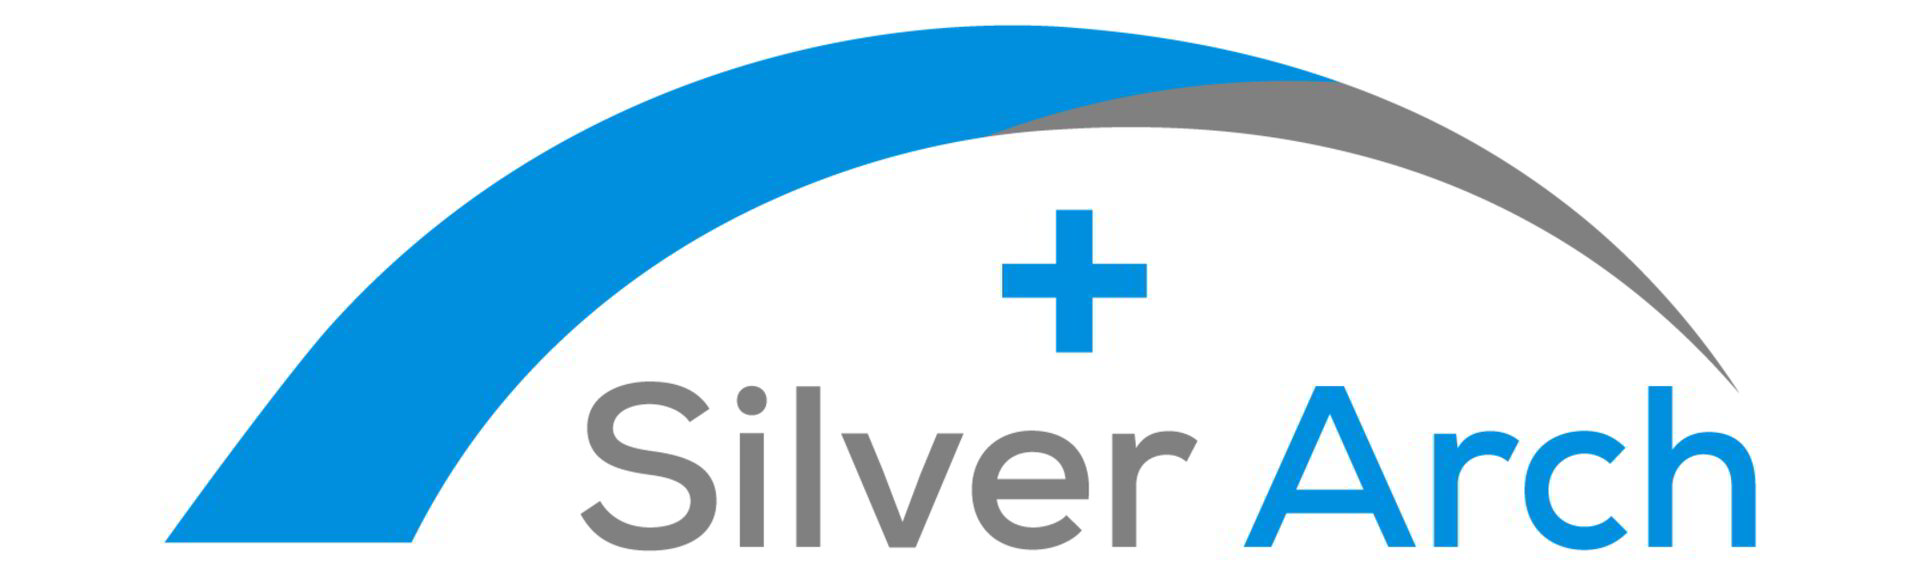 Homepage Of The Silver Arch Antimicrobial Product Store